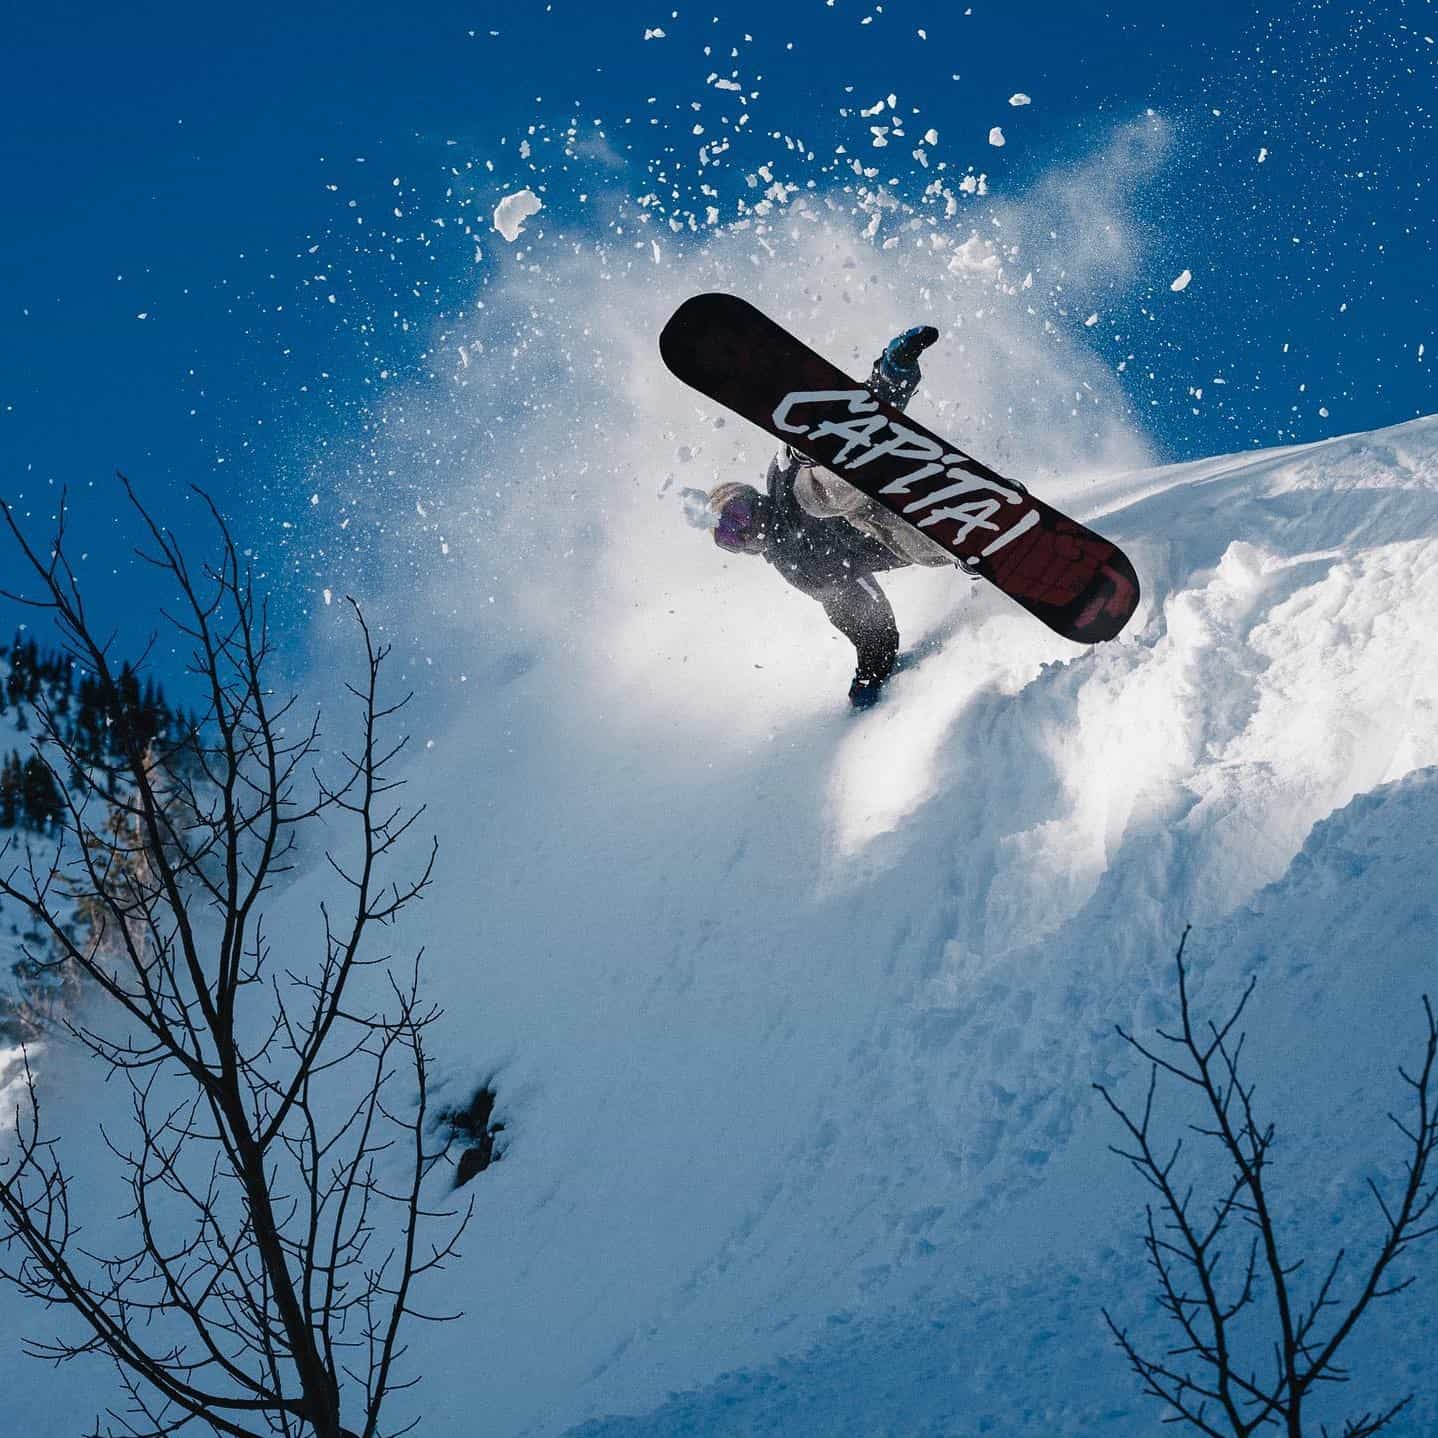 10 Best Snowboard Brands - Must Read This Before Buying